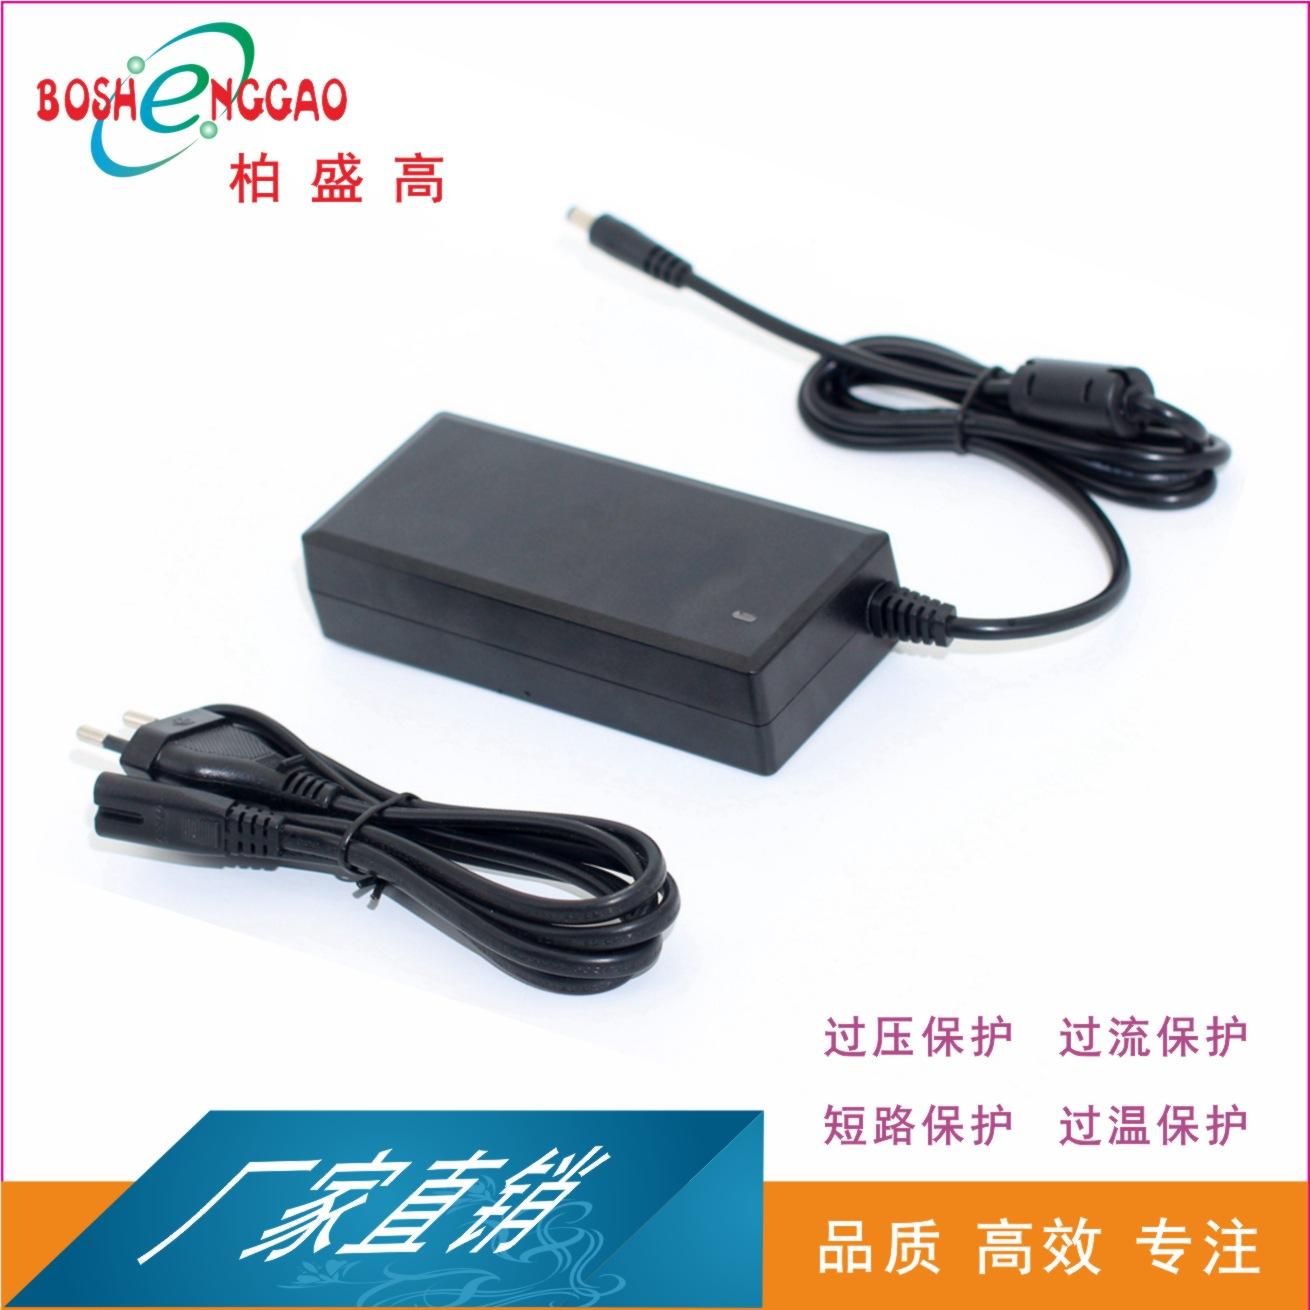 black universal AC to DC 12V 7A 84W desktop adapter with 3 pin european plug and AC power cord for router